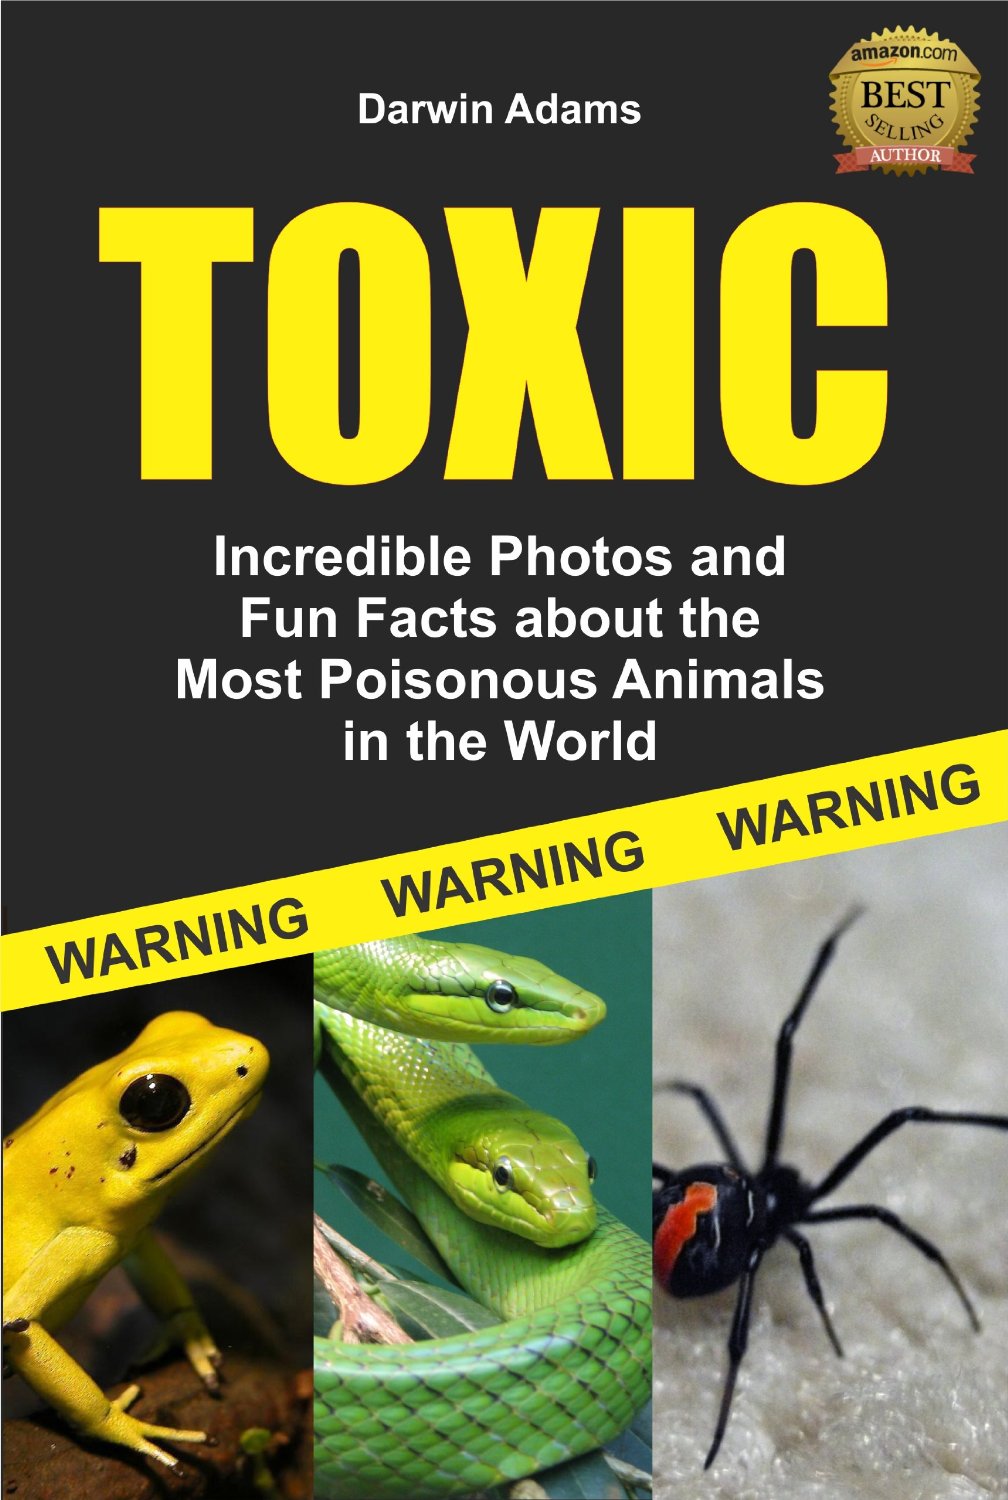 Toxic: Incredible Pictures and Fun Facts about the Most Poisonous Animals in the World by Darwin Adams